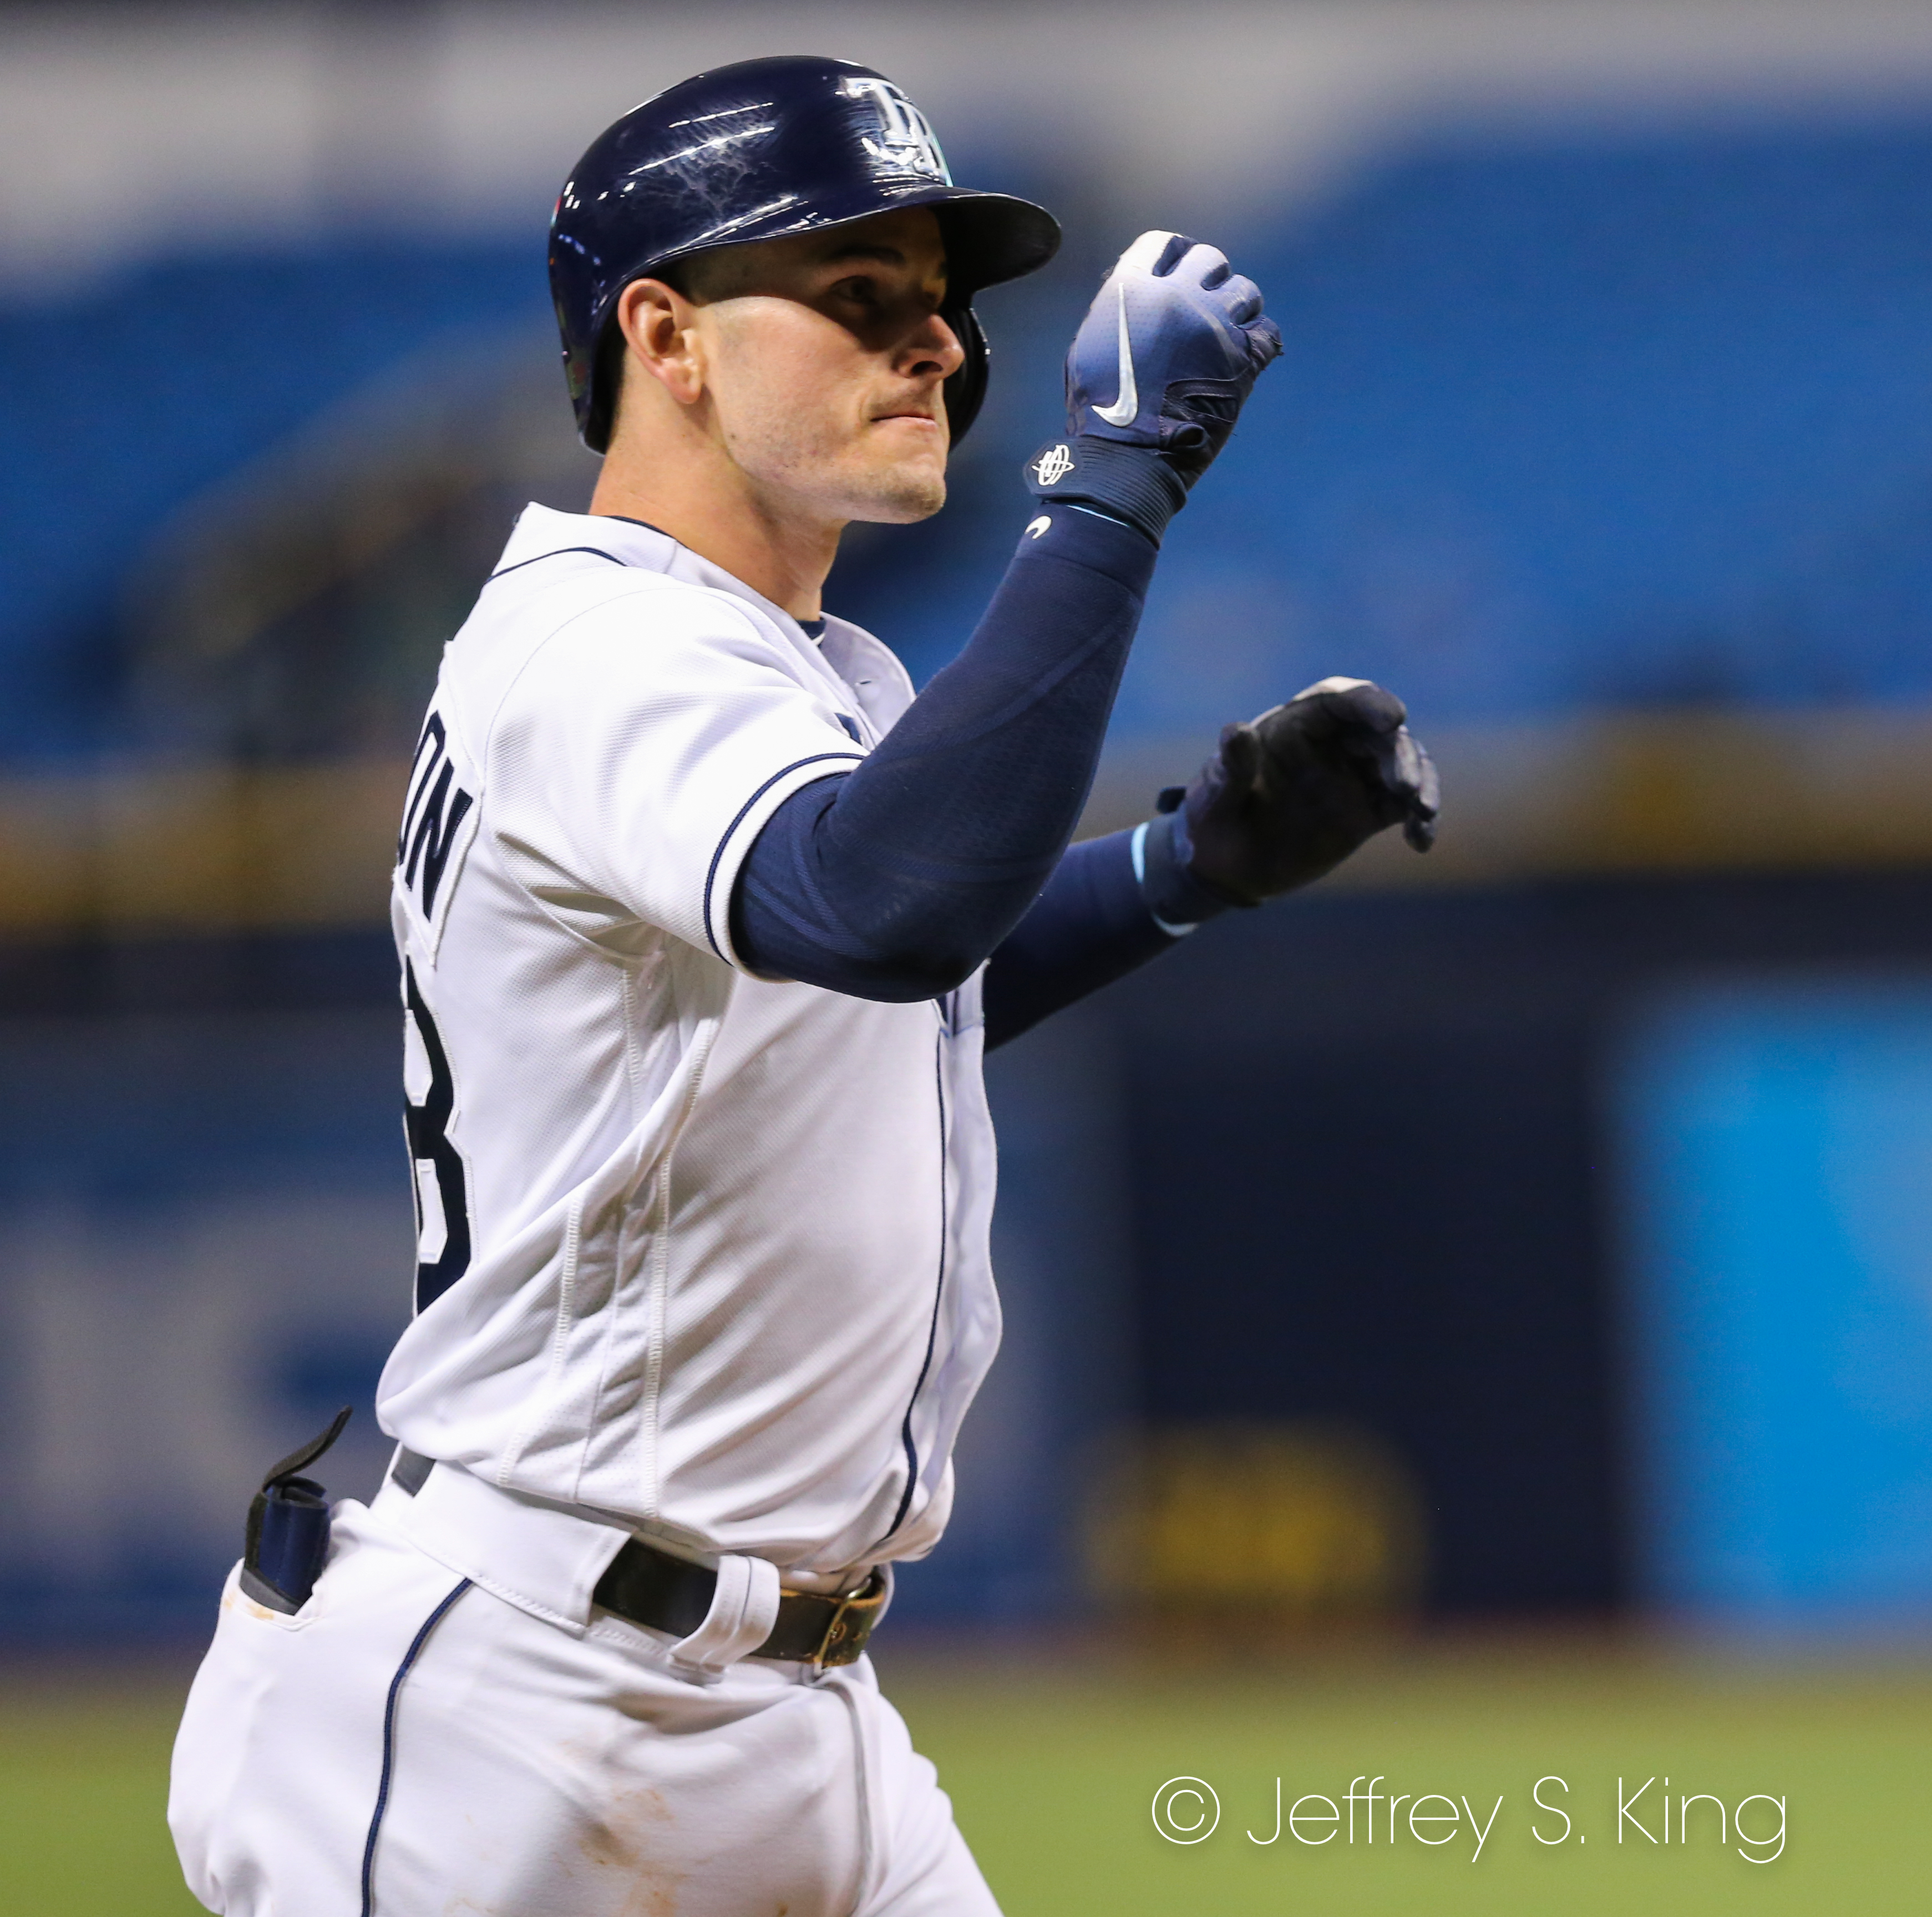 Robertson hit a home run for the Rays./JEFFREY S. KING